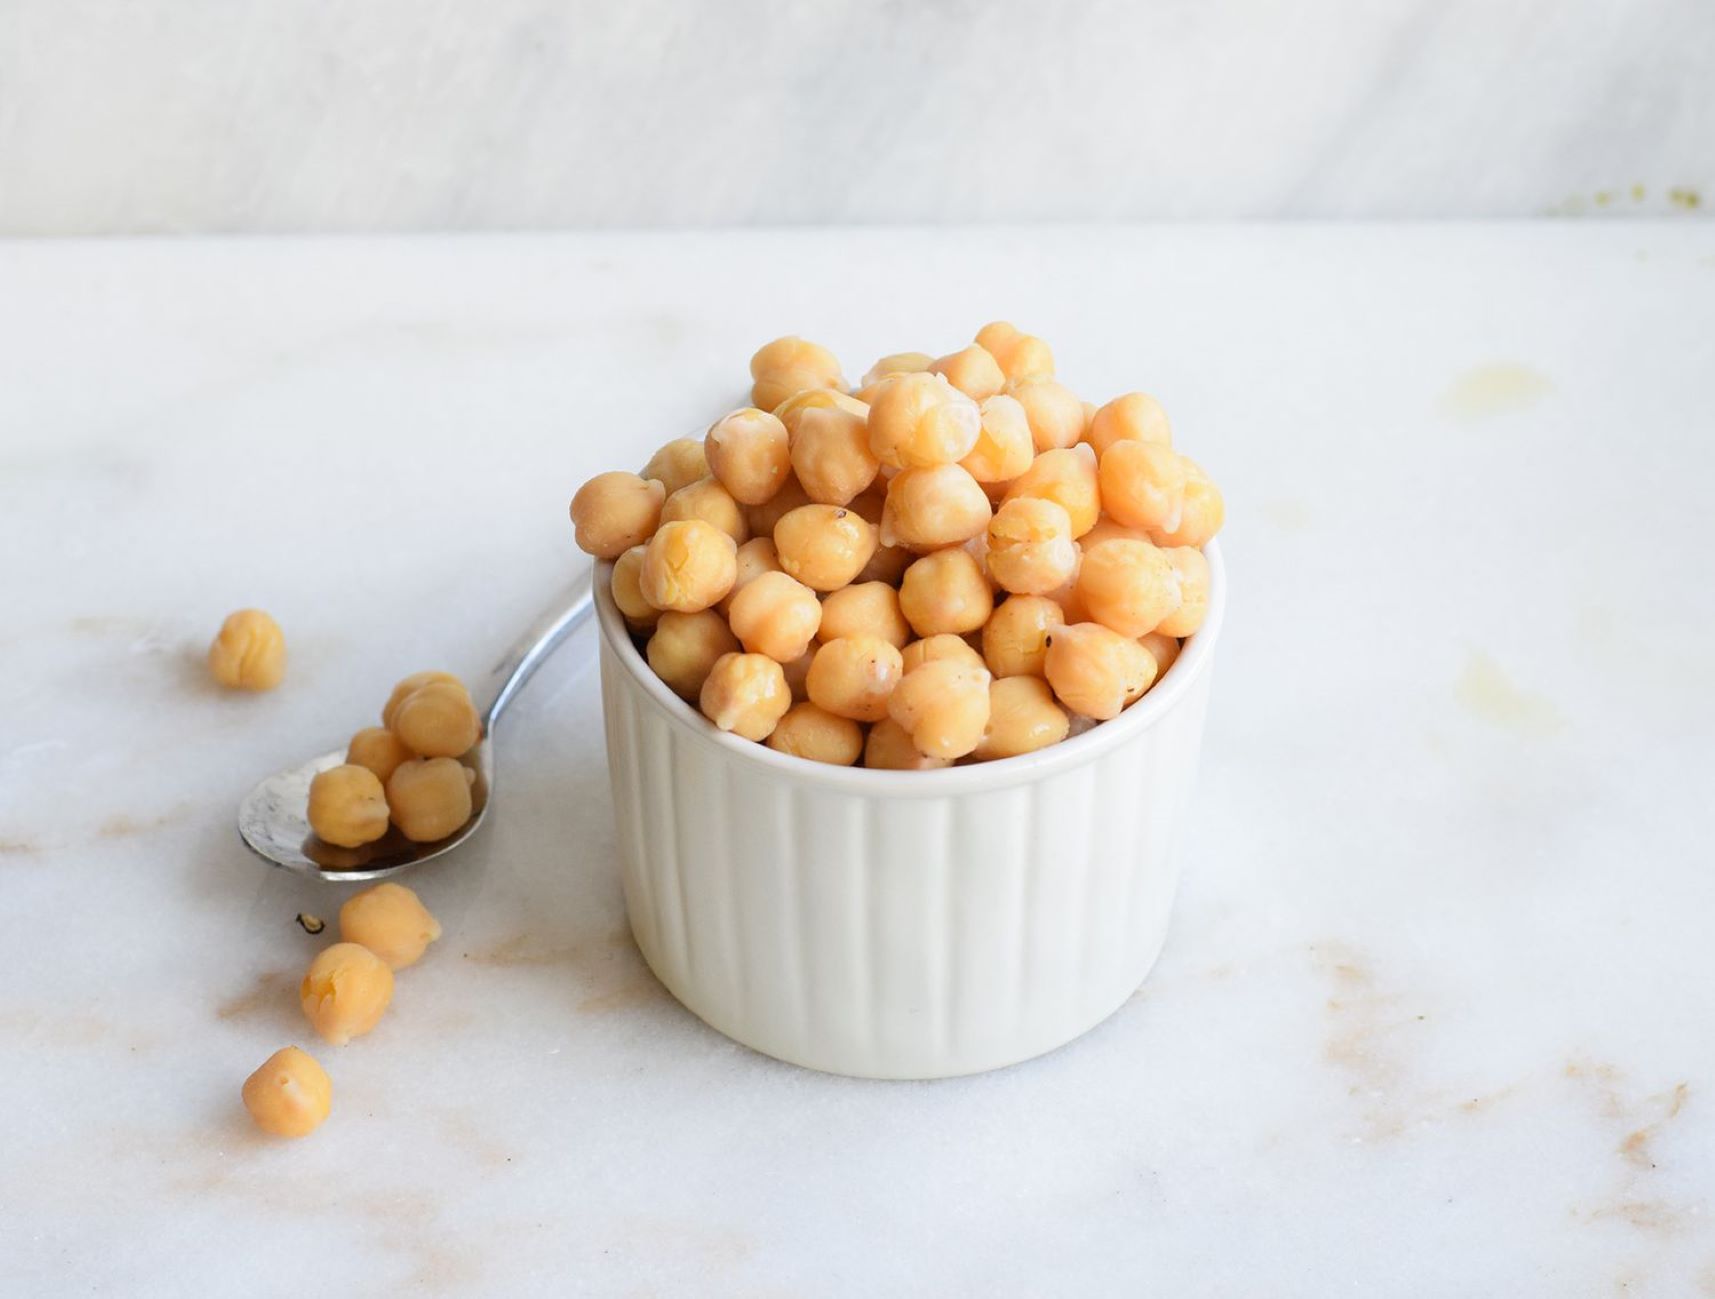 How To Store Cooked Chickpeas